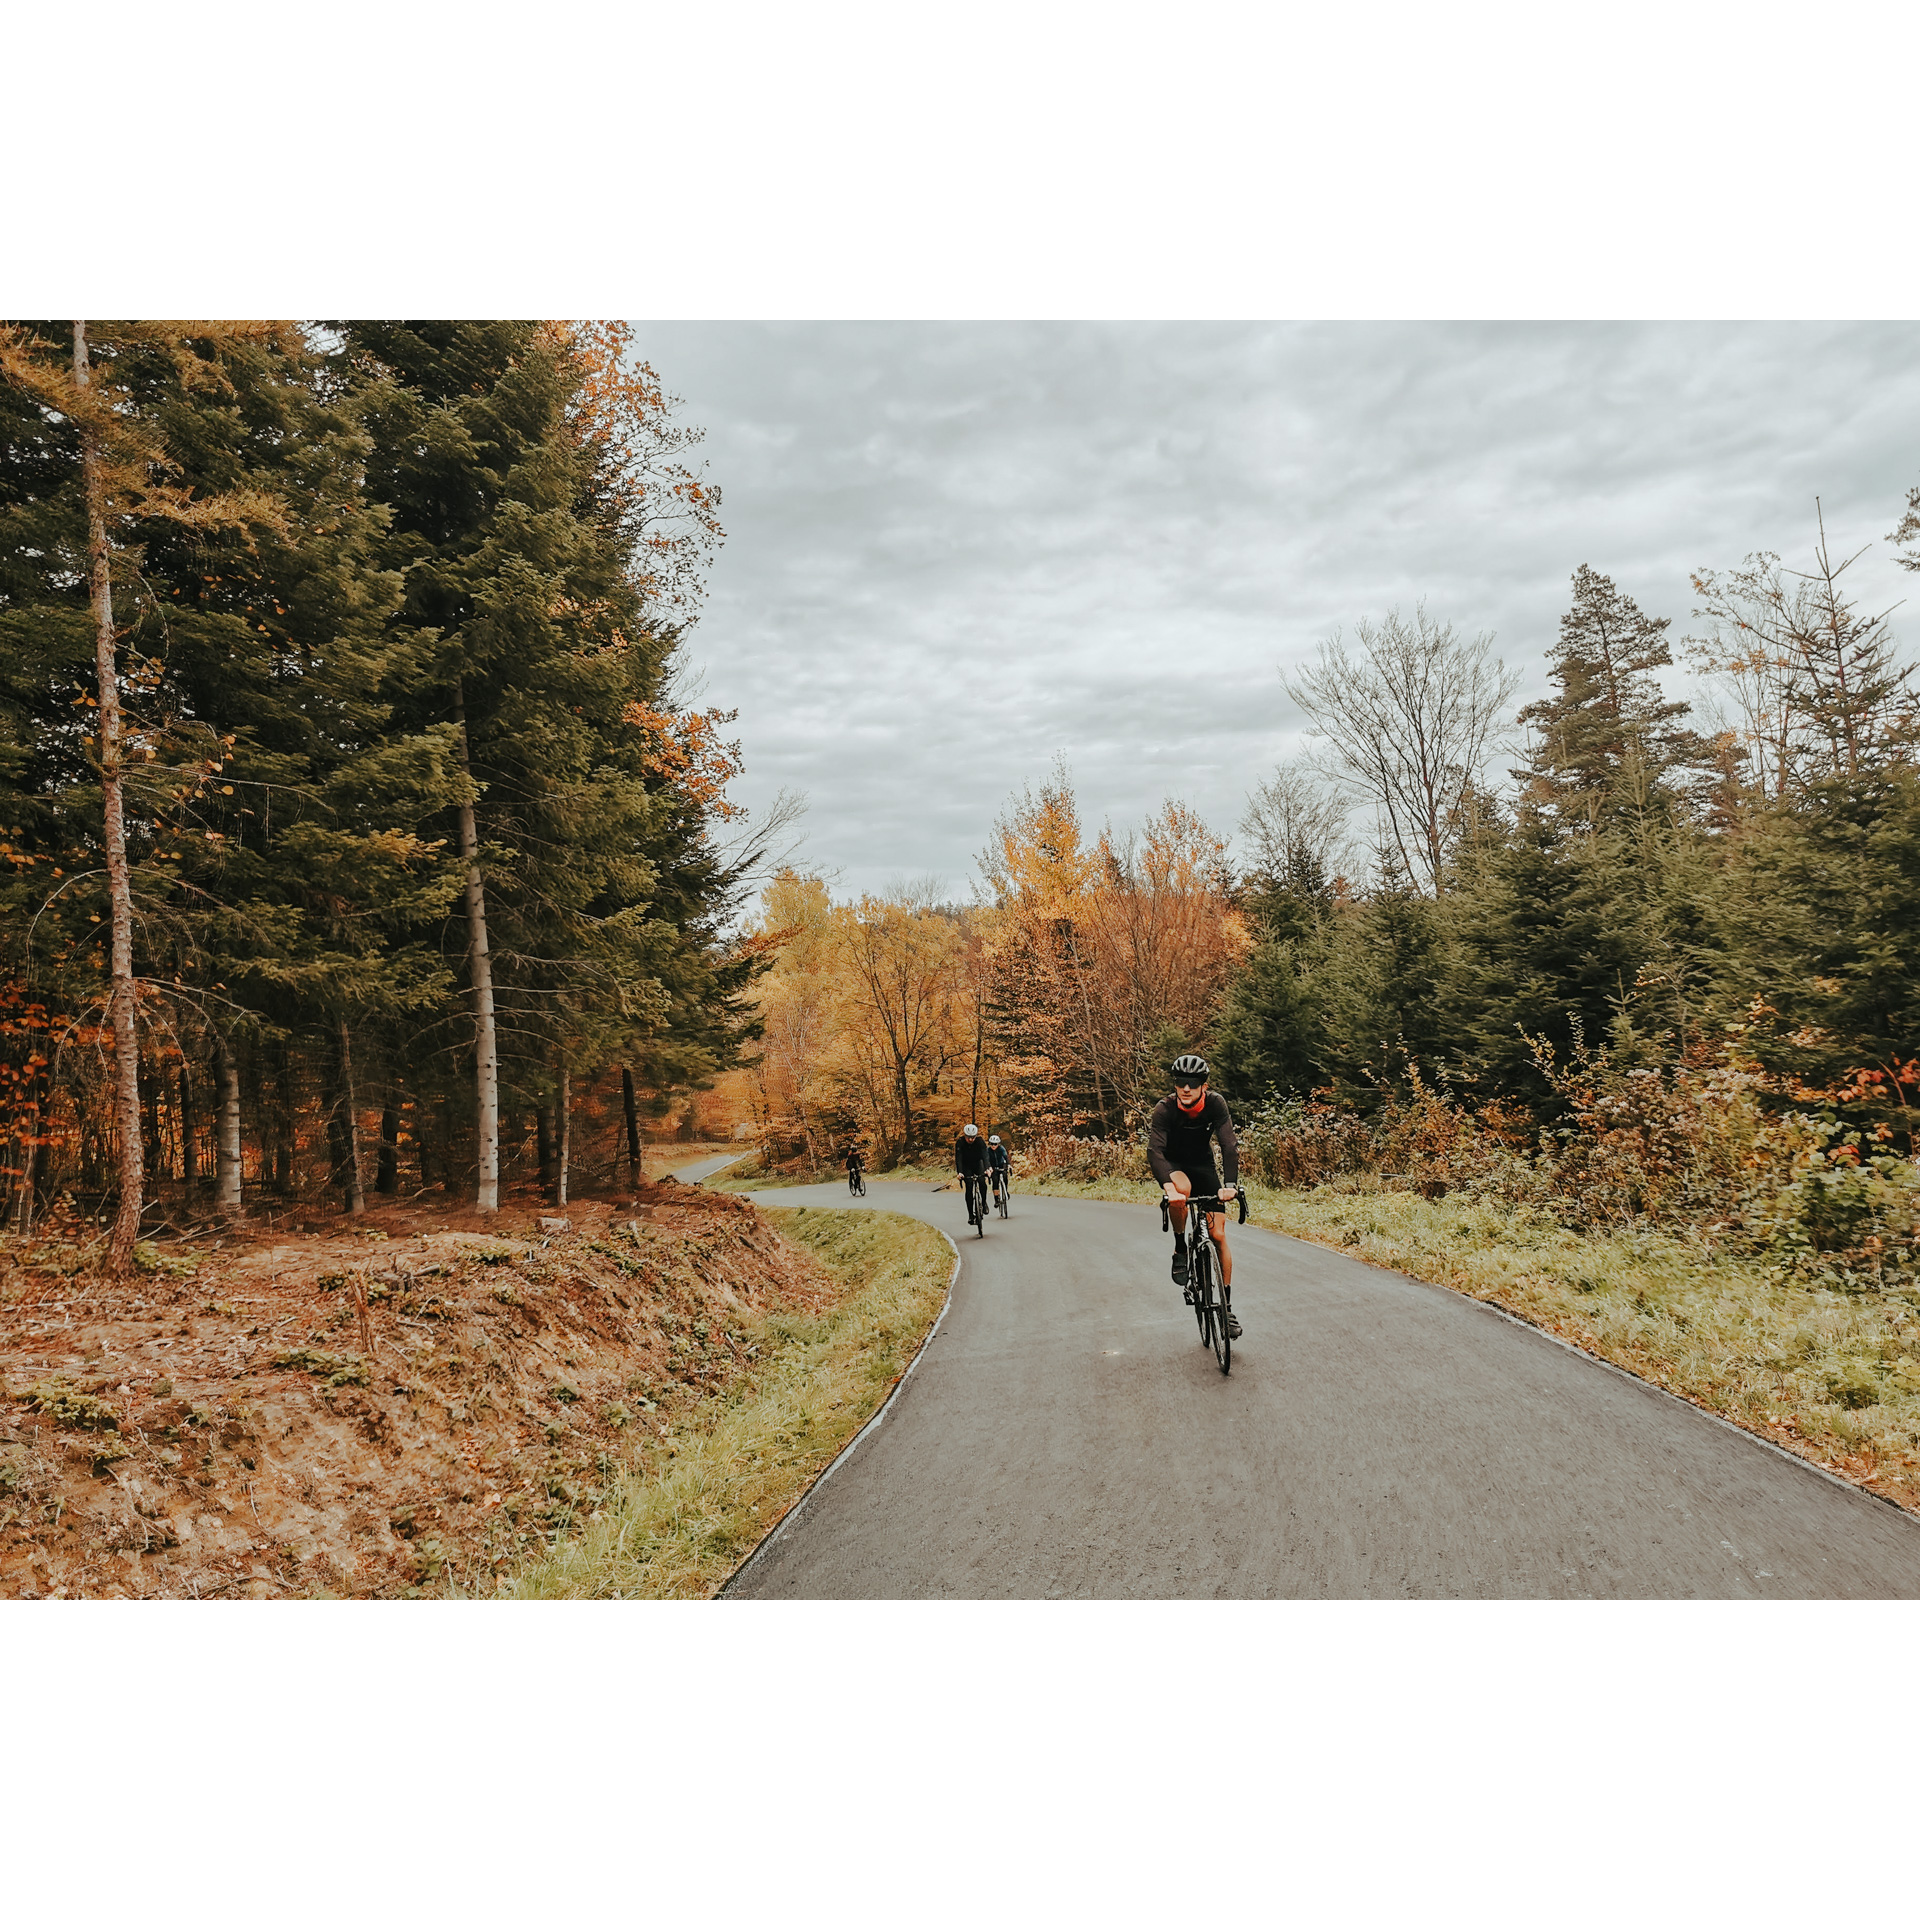 Four cyclists in cycling clothes and helmets cycling along an asphalt road among red-brown-green trees